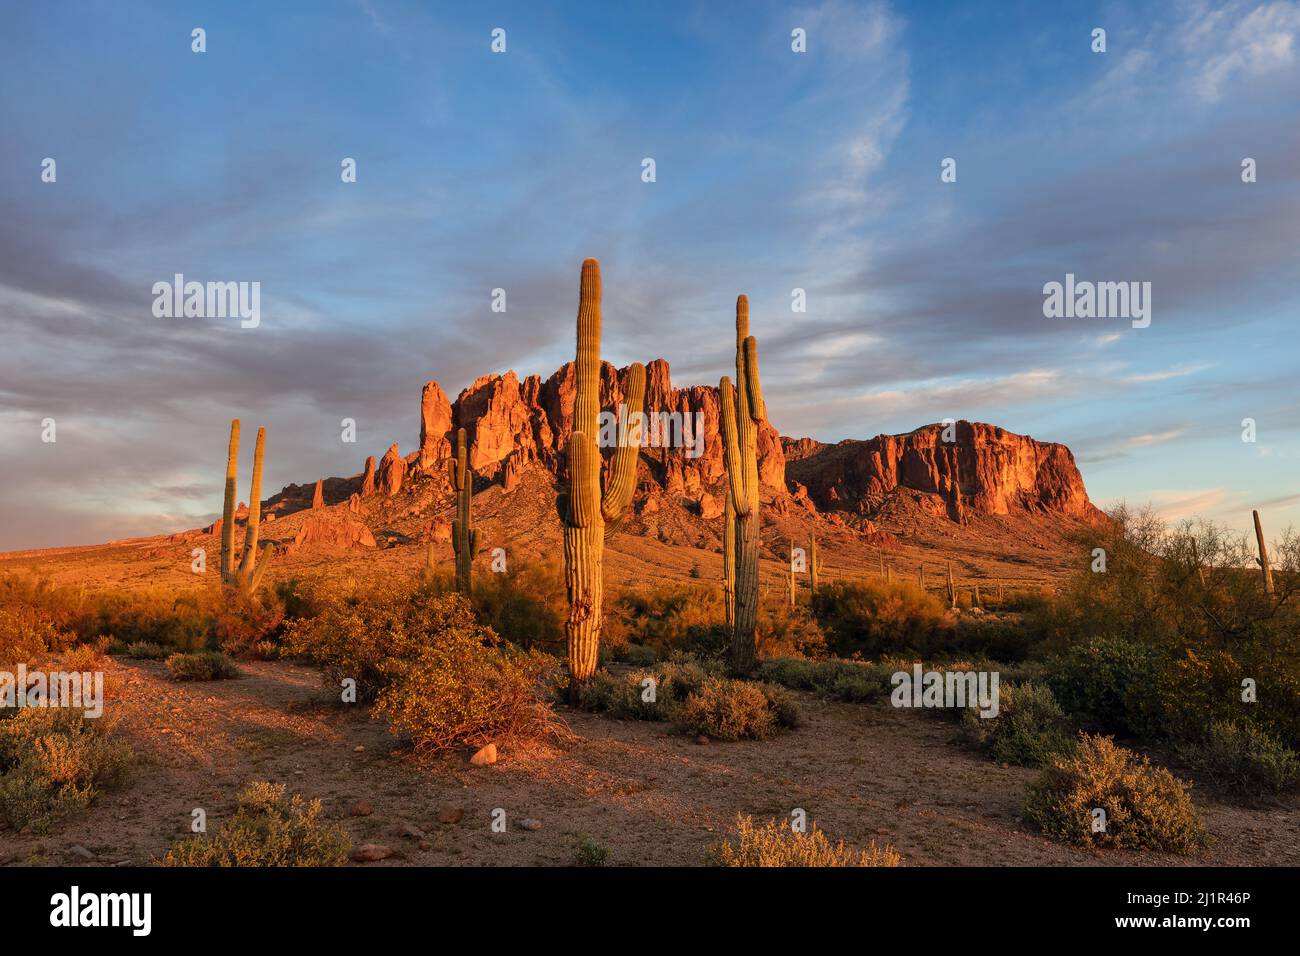 Scenic desert landscape in the Superstition Mountains at Lost Dutchman State Park, Arizona, USA Stock Photo